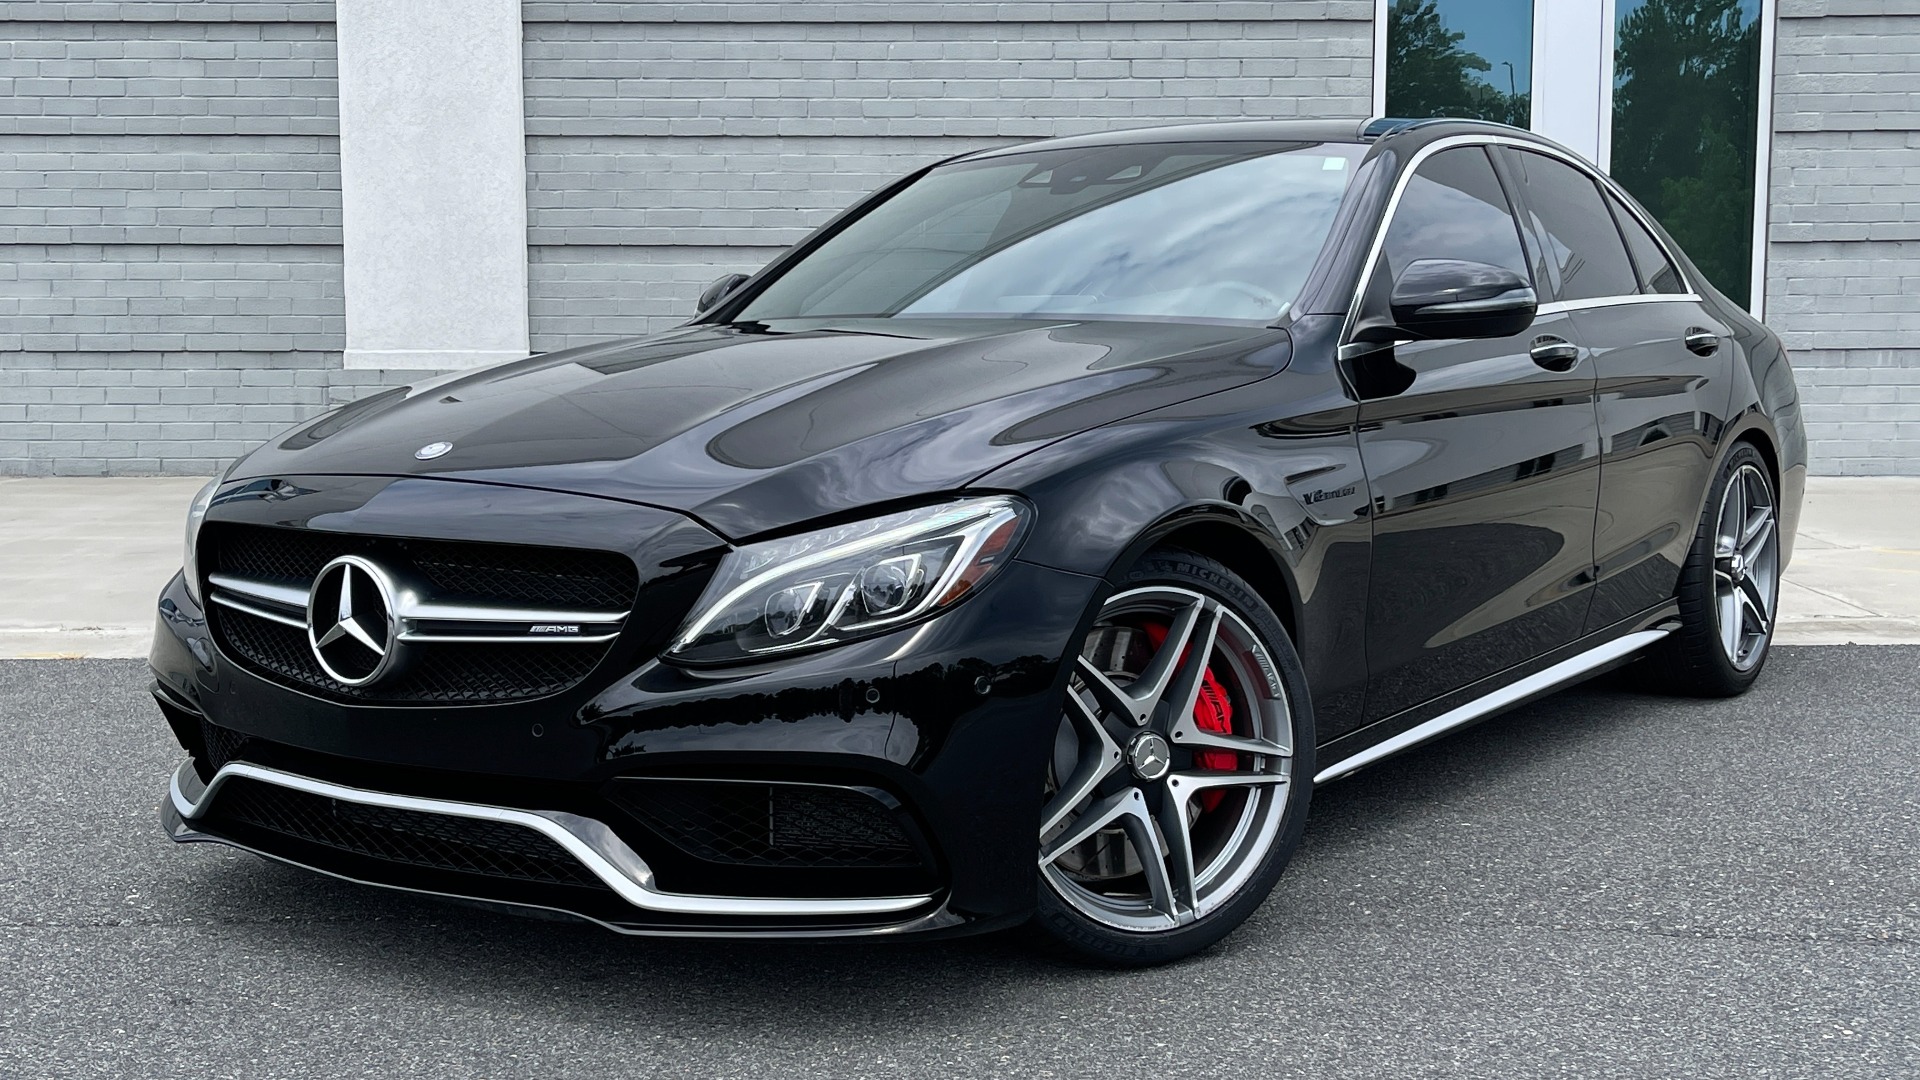 Used 2016 Mercedes-Benz C-CLASS AMG C 63 S SEDAN / NAV / BURMESTER / PANO-ROOF / CAMERA for sale $69,900 at Formula Imports in Charlotte NC 28227 1